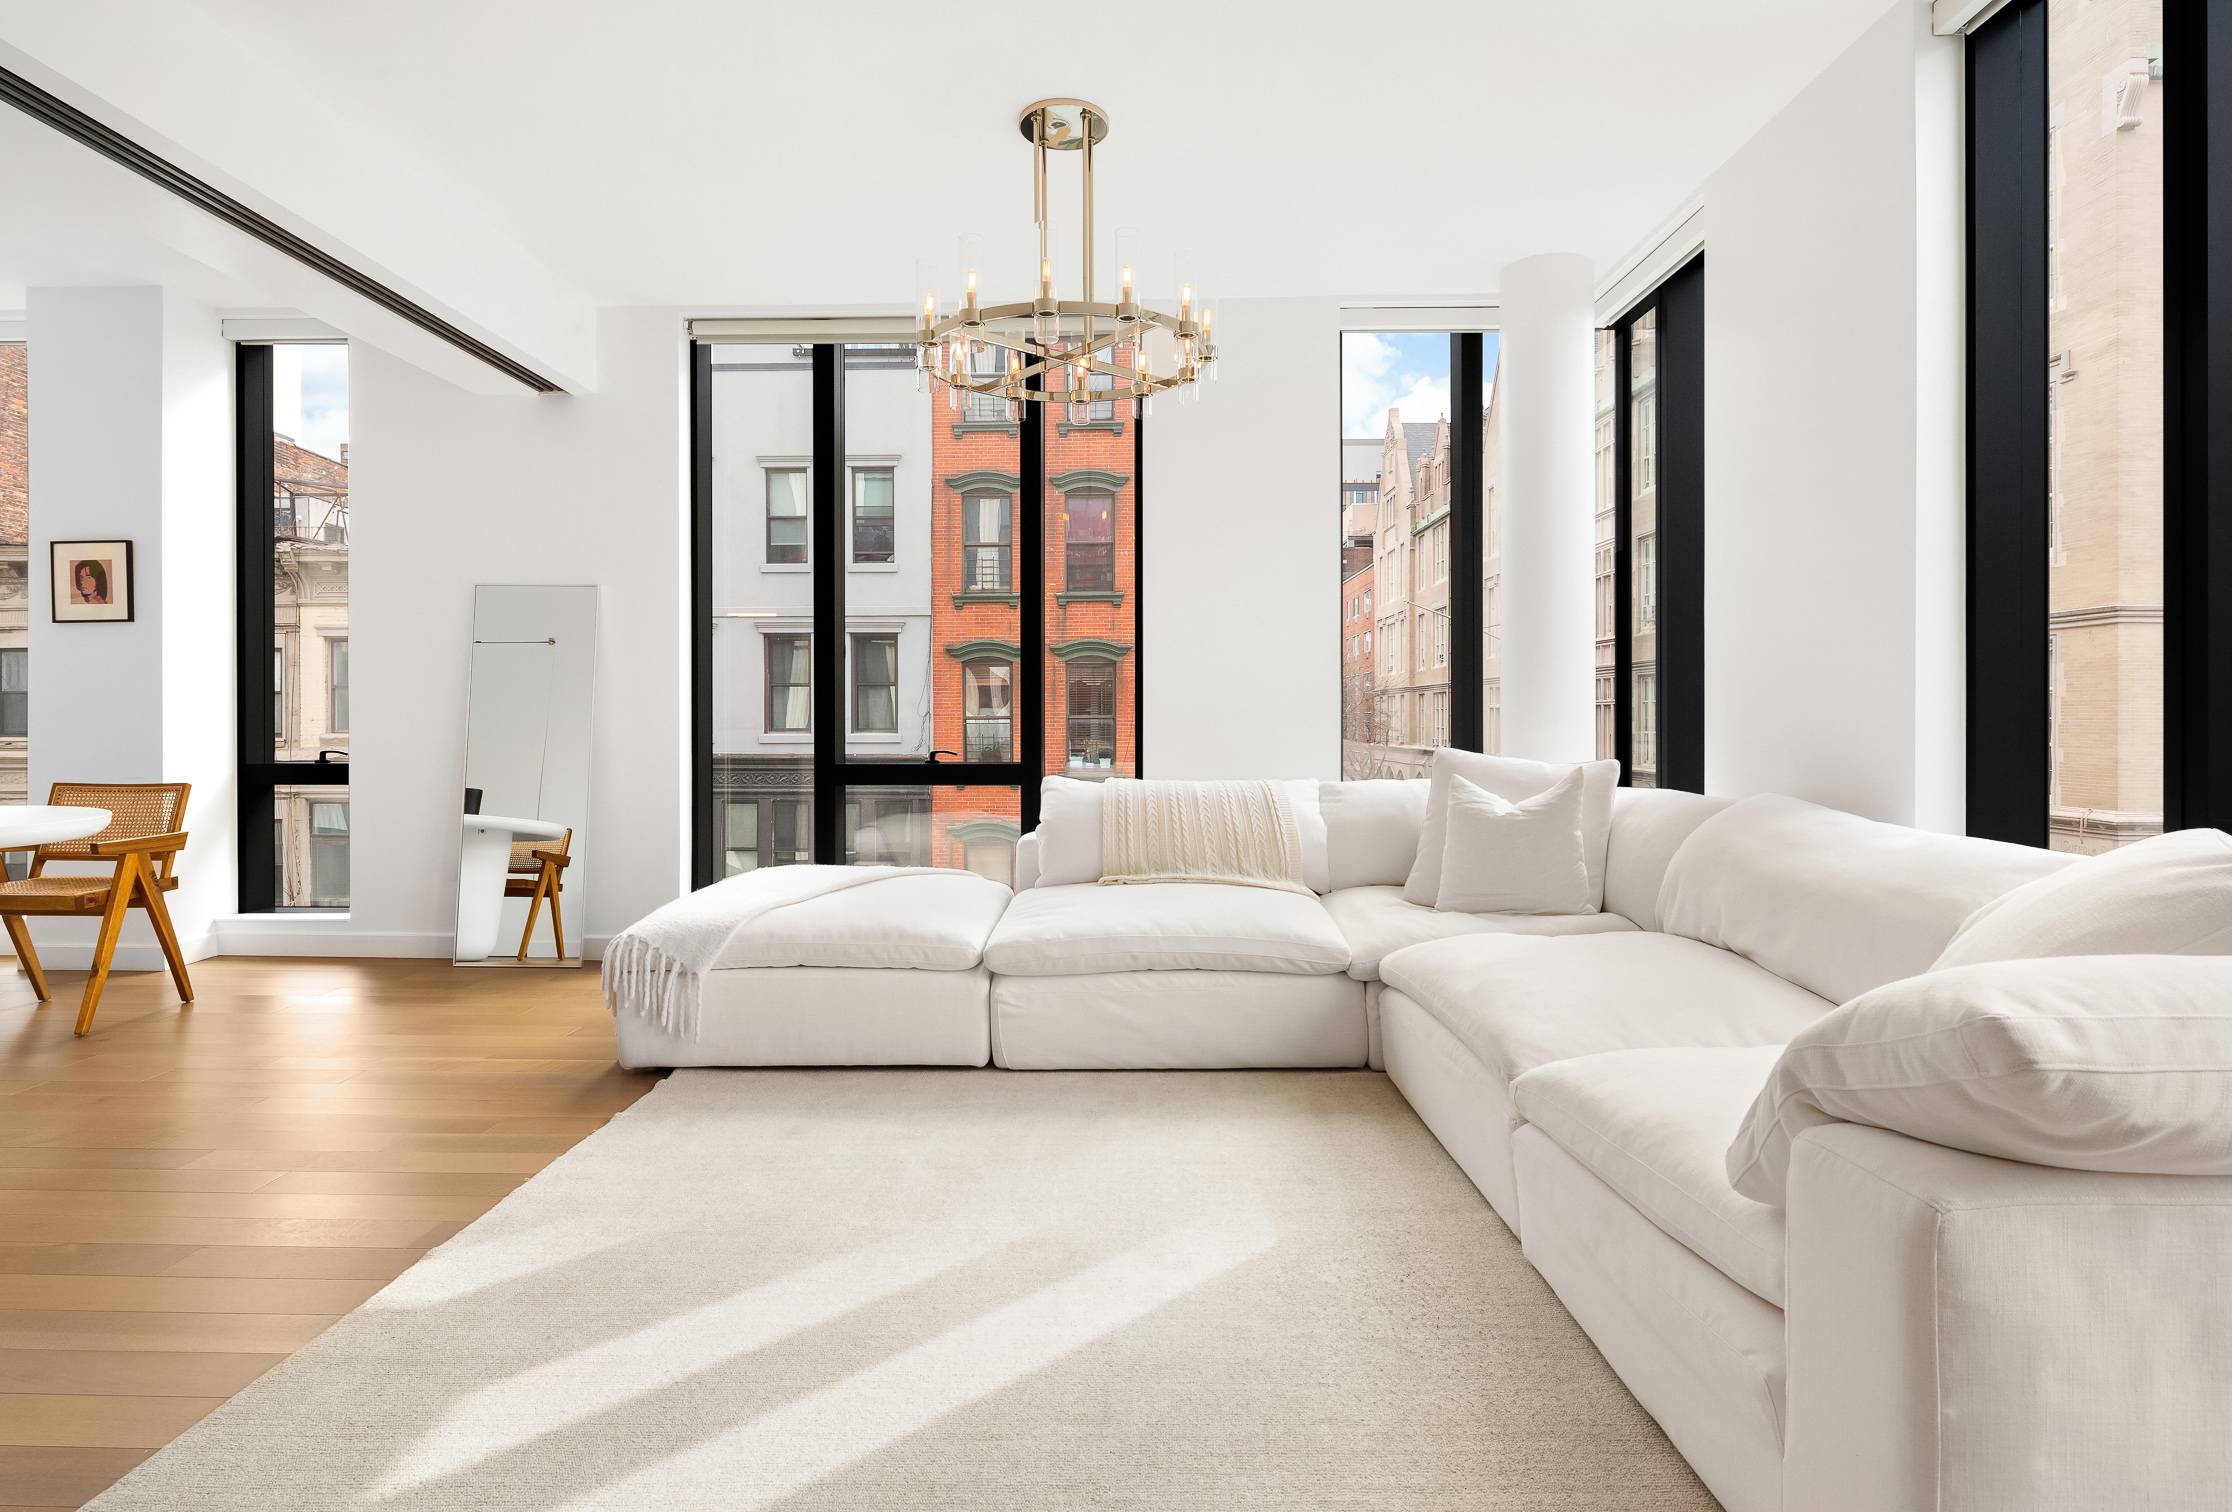 On a prominent corner in the heart of the Lower East Side you will find 150 Rivington, a highly sought after, full service building designed by visionary architect Gluck.